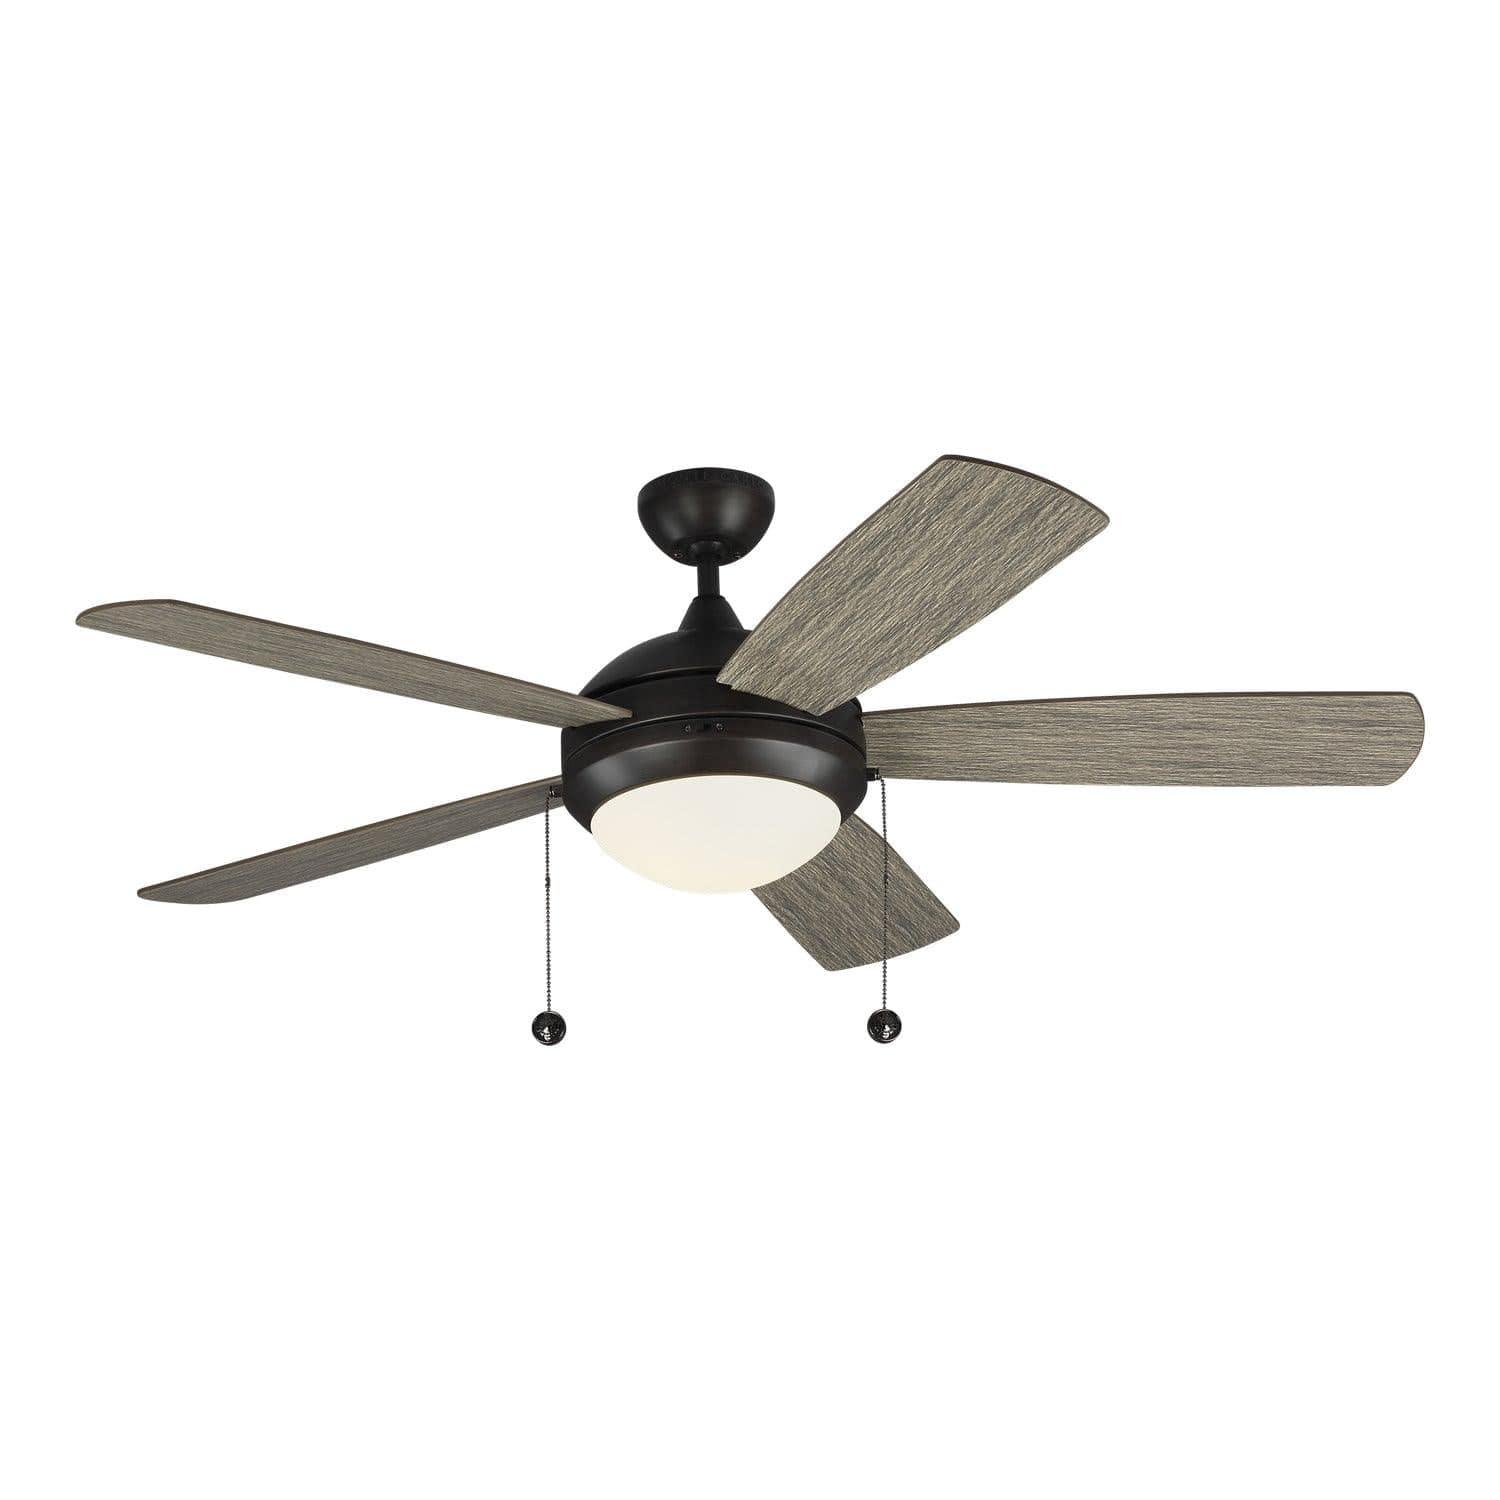 Visual Comfort Fan Collection - Discus Classic 52" Ceiling Fan - 5DIC52AGPD-V1 | Montreal Lighting & Hardware